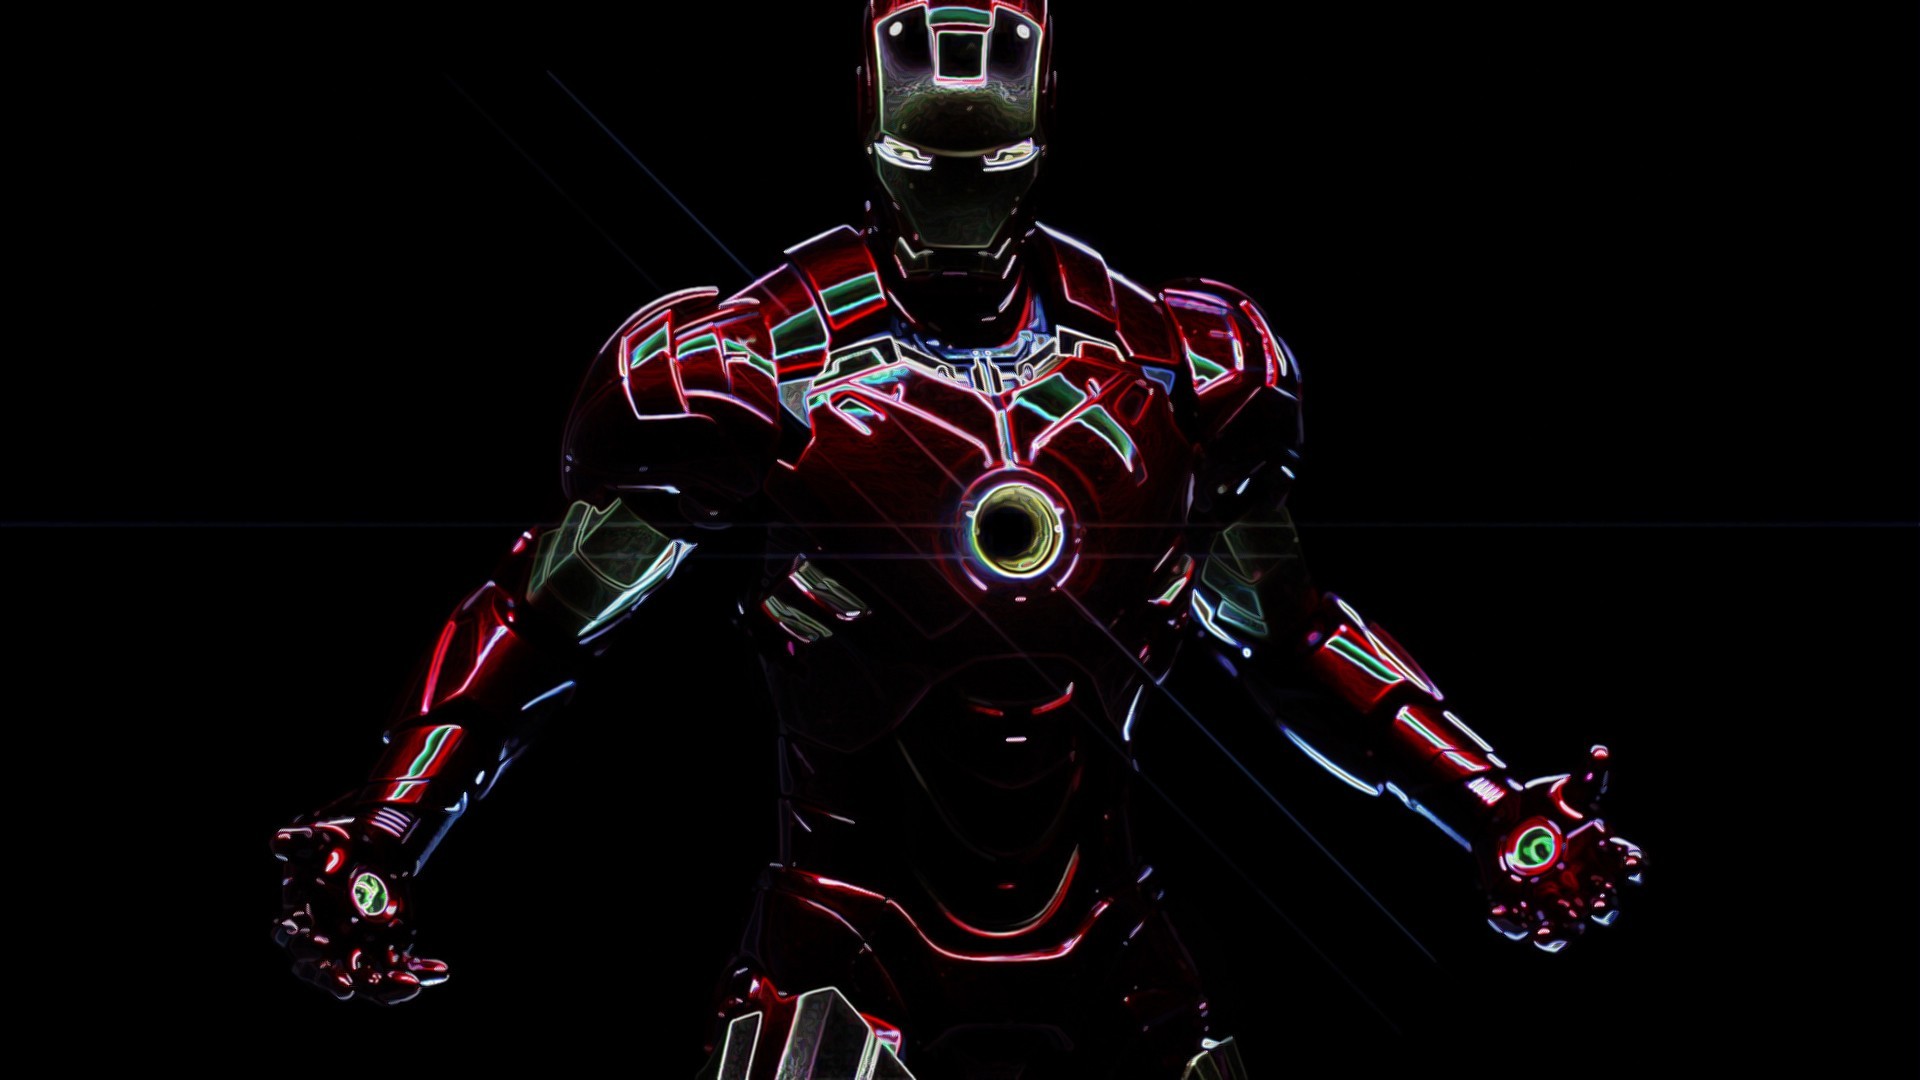 1920x1080 I collect a lot of Iron Man wallpapers on this site, such as this file of  Iron Man (7 of 23), the #7 of all 23 superheroes wallpaper in HD quality.